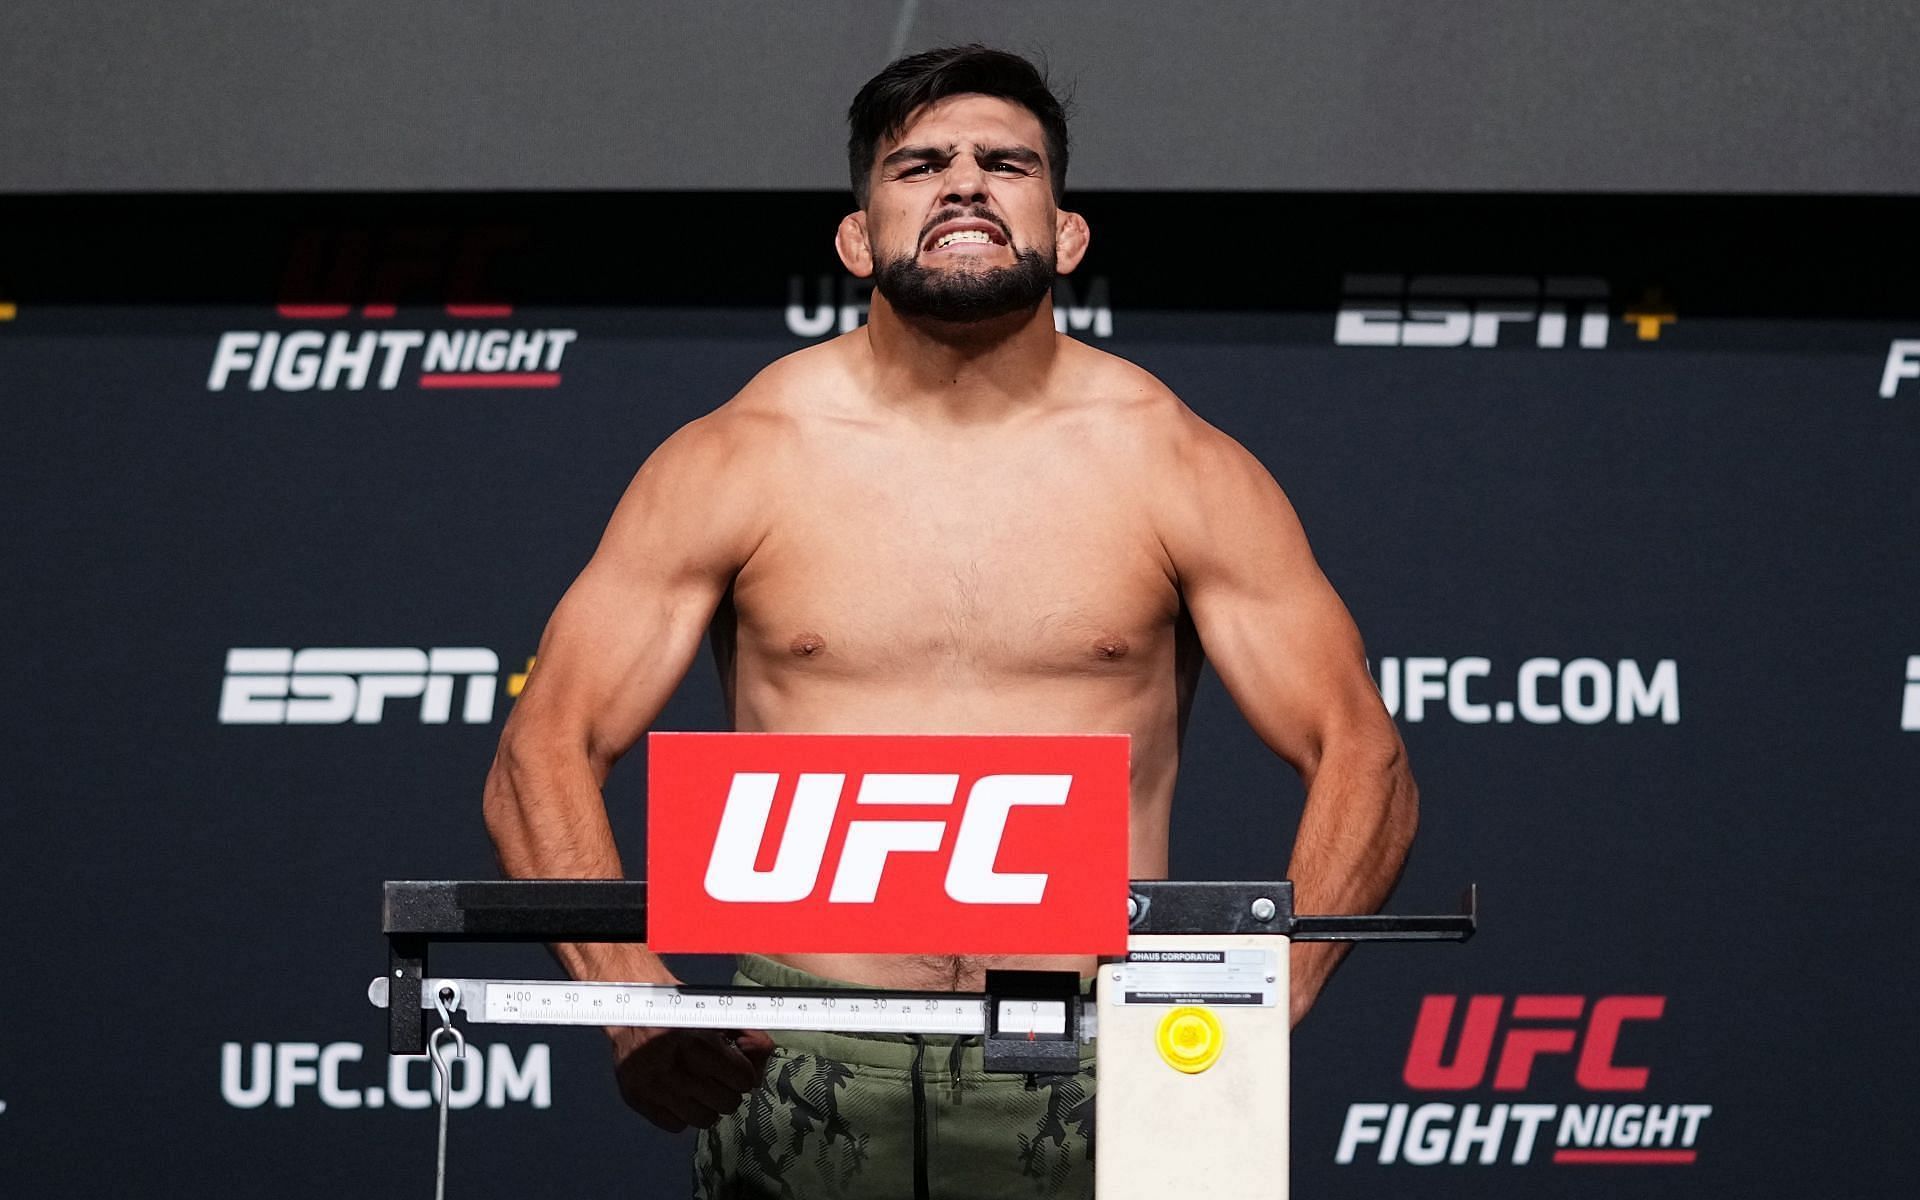 Kelvin Gastelum has confirmed that he has received and signed a bout agreement for 2022